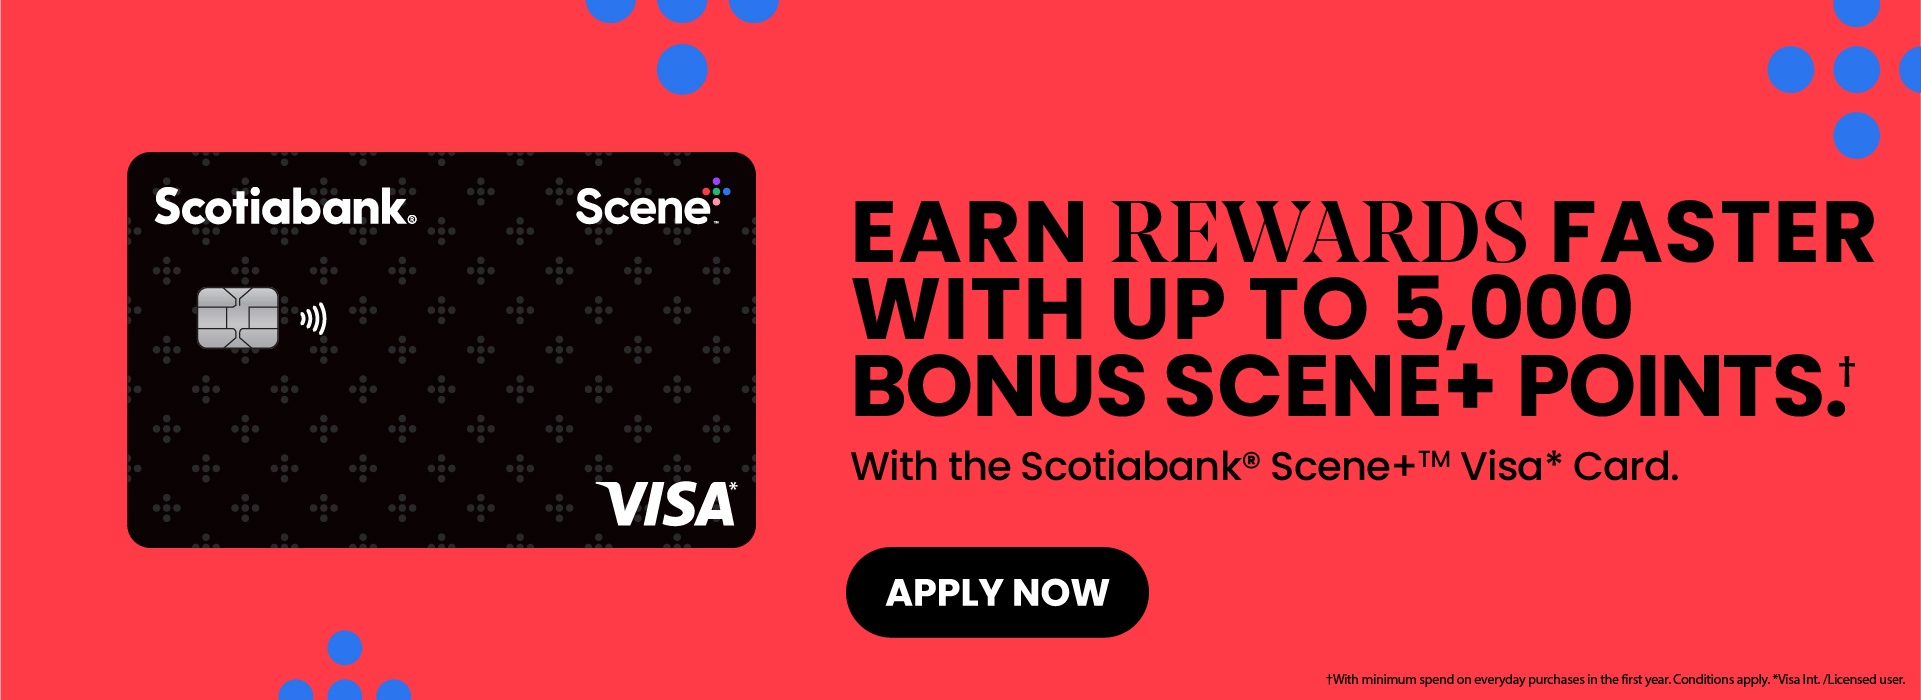 Get 2 Scene+ points on every $1 spent with a Scotiabank Scene+ Visa at participating grocery stores.